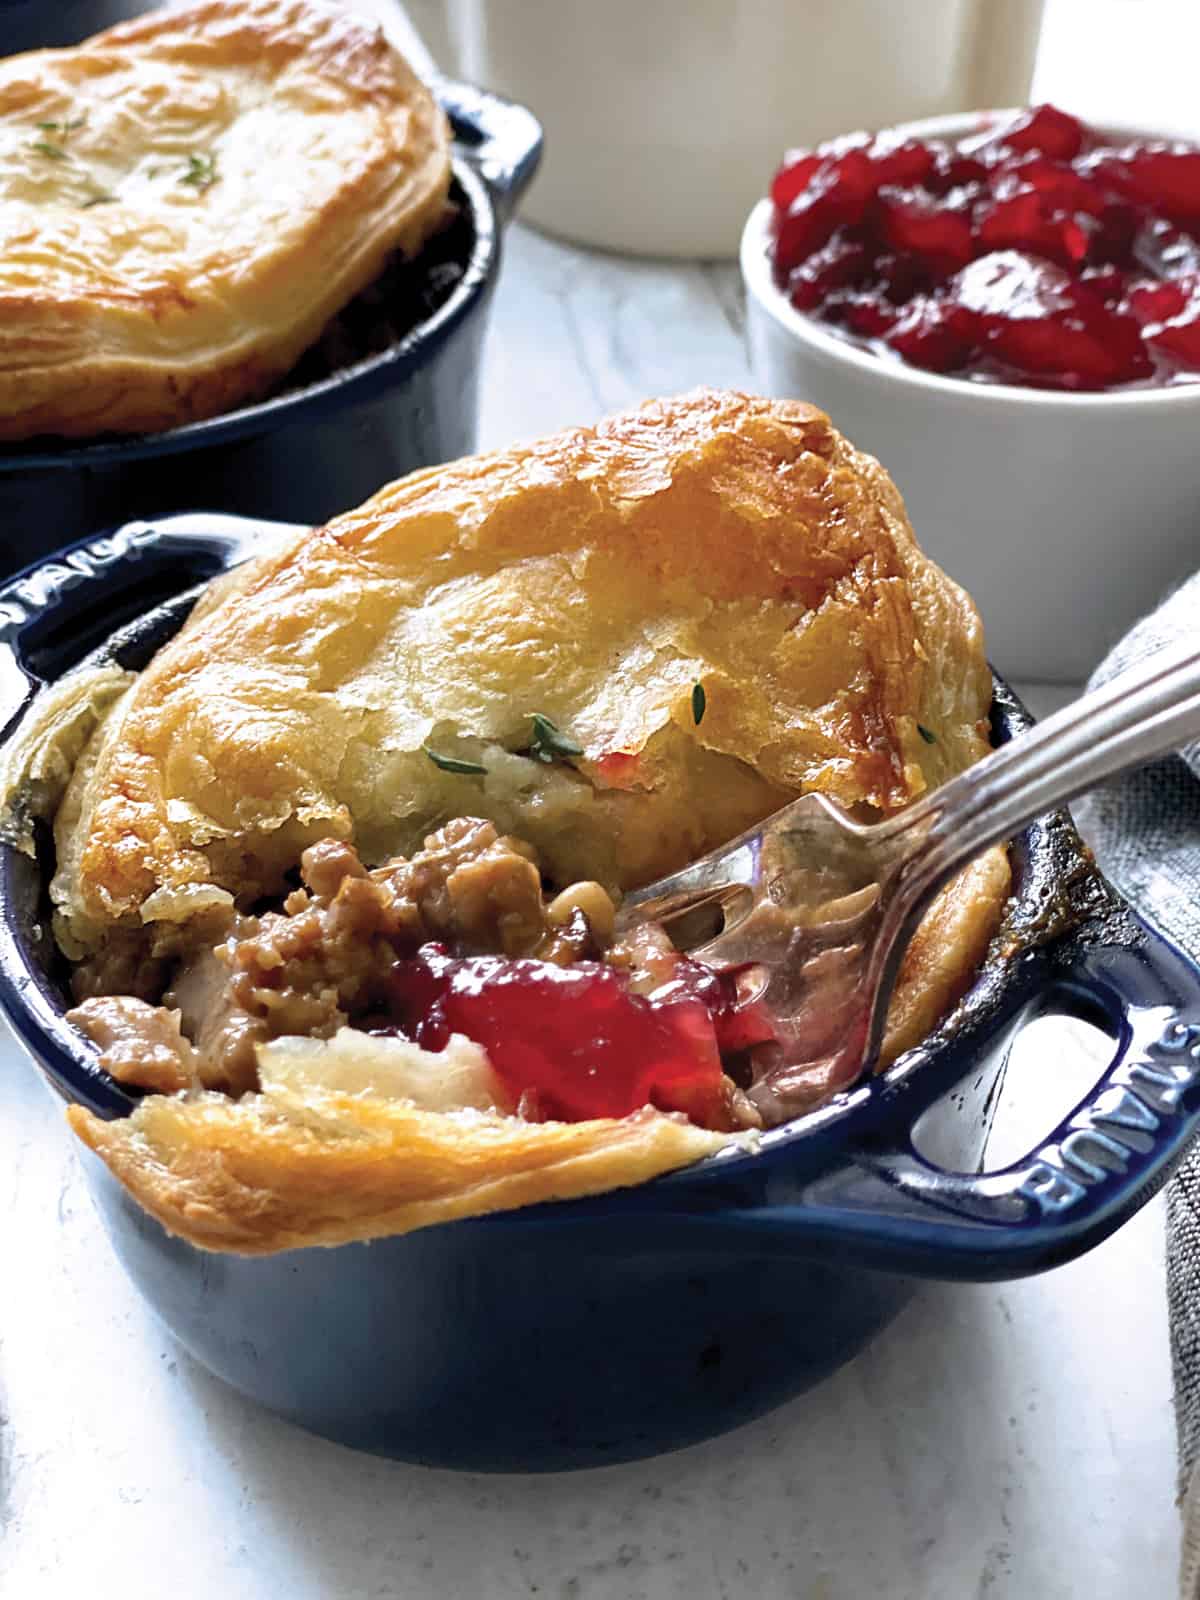 A mini pot pie with a fork inside, breaking the pastry and revealing stuffing gravy and some cranberry sauce.